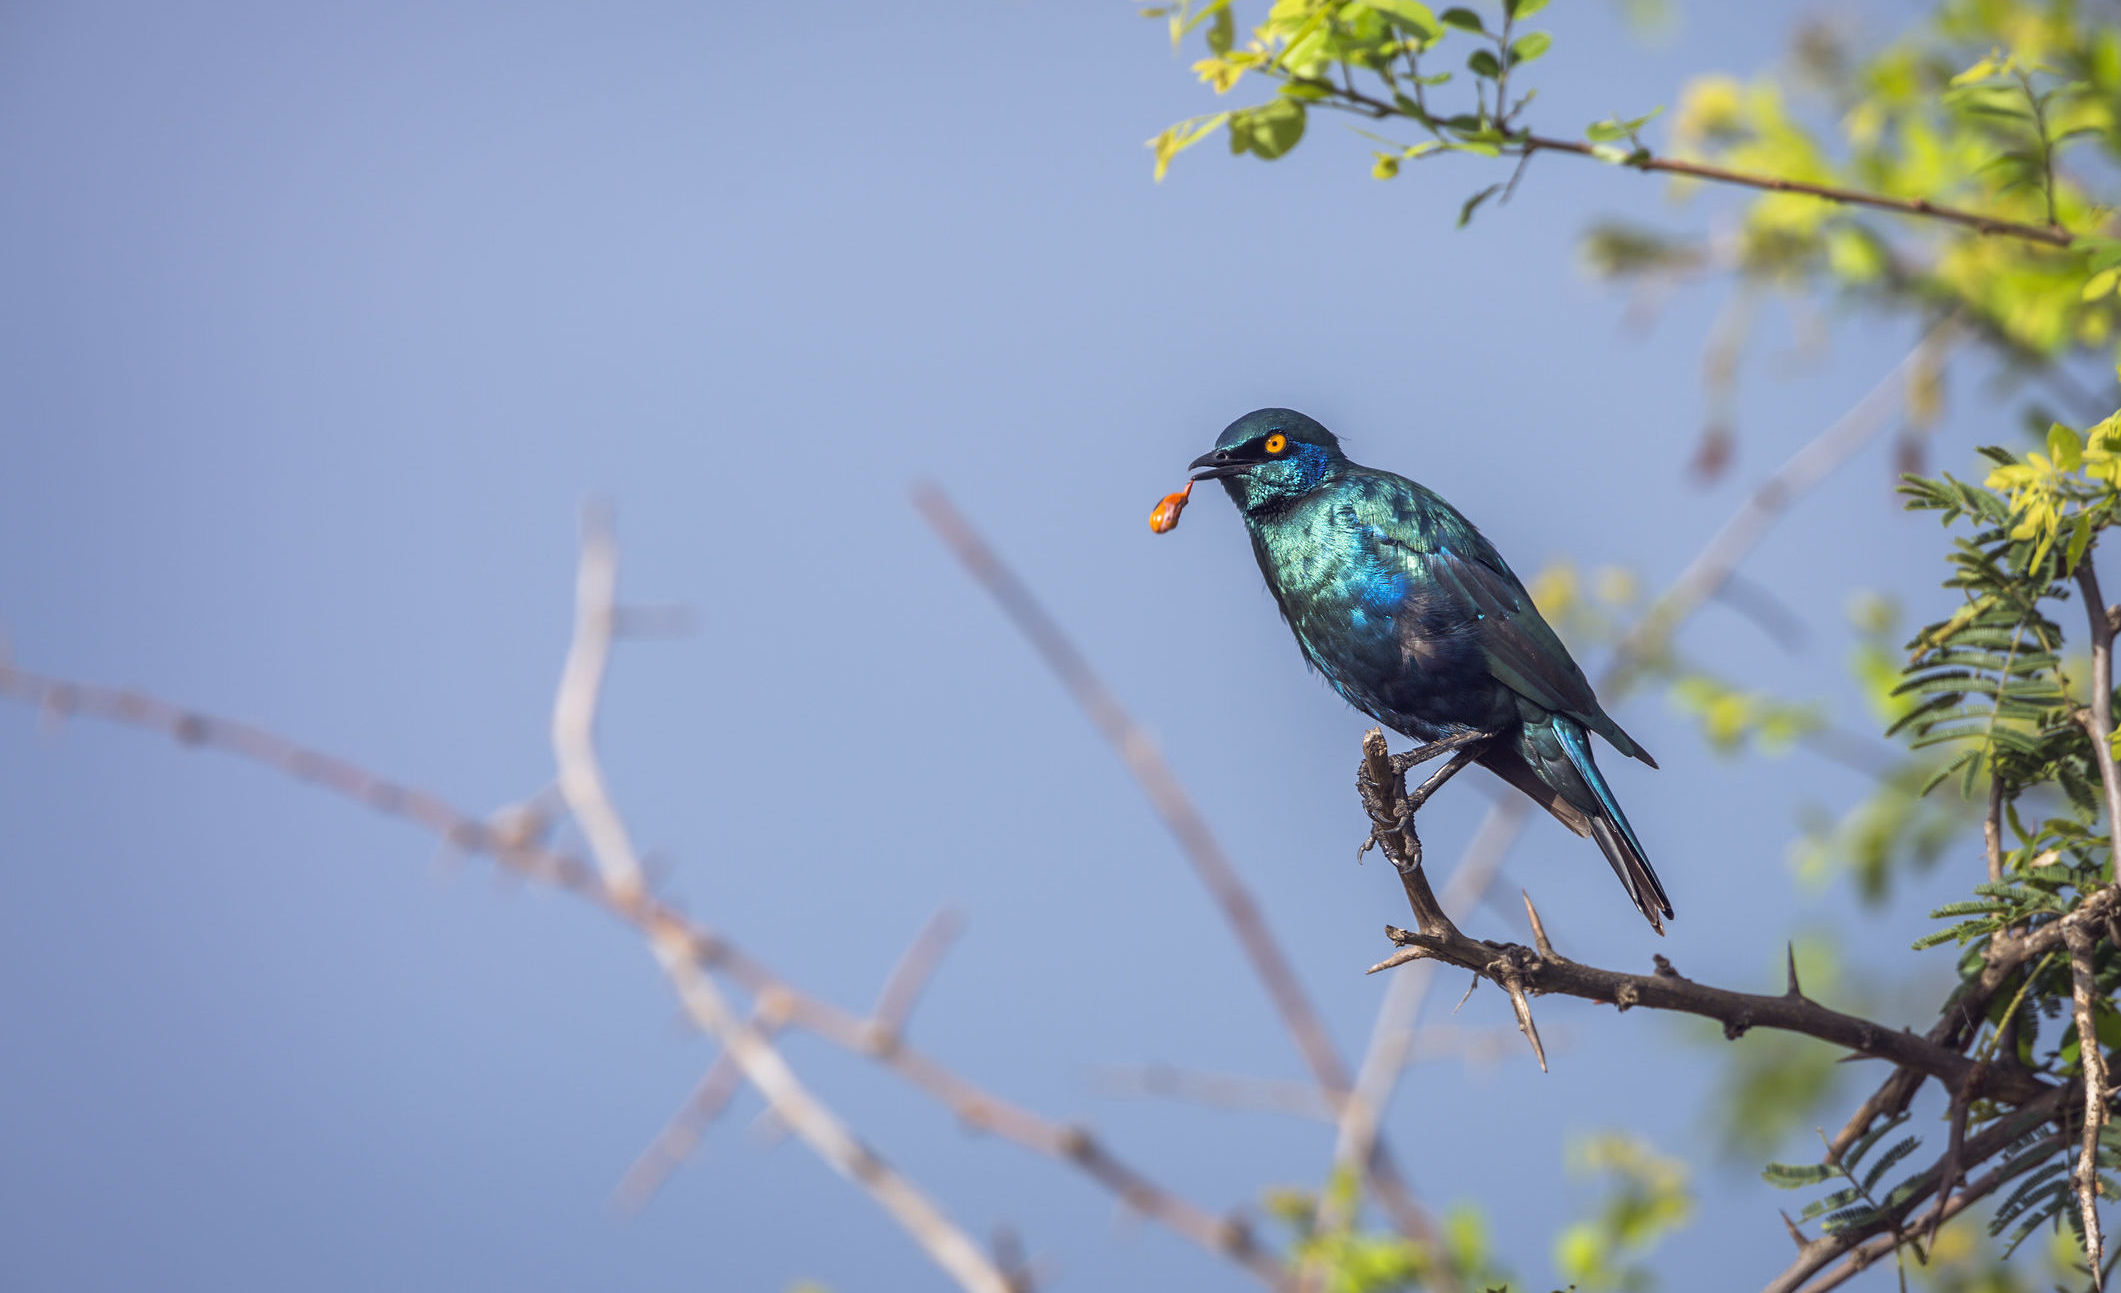 Witness beautiful creatures like this greater blue-eared starling in the Greater Kruger, South Africa, when you take a tailor-made holiday with Alfred&.